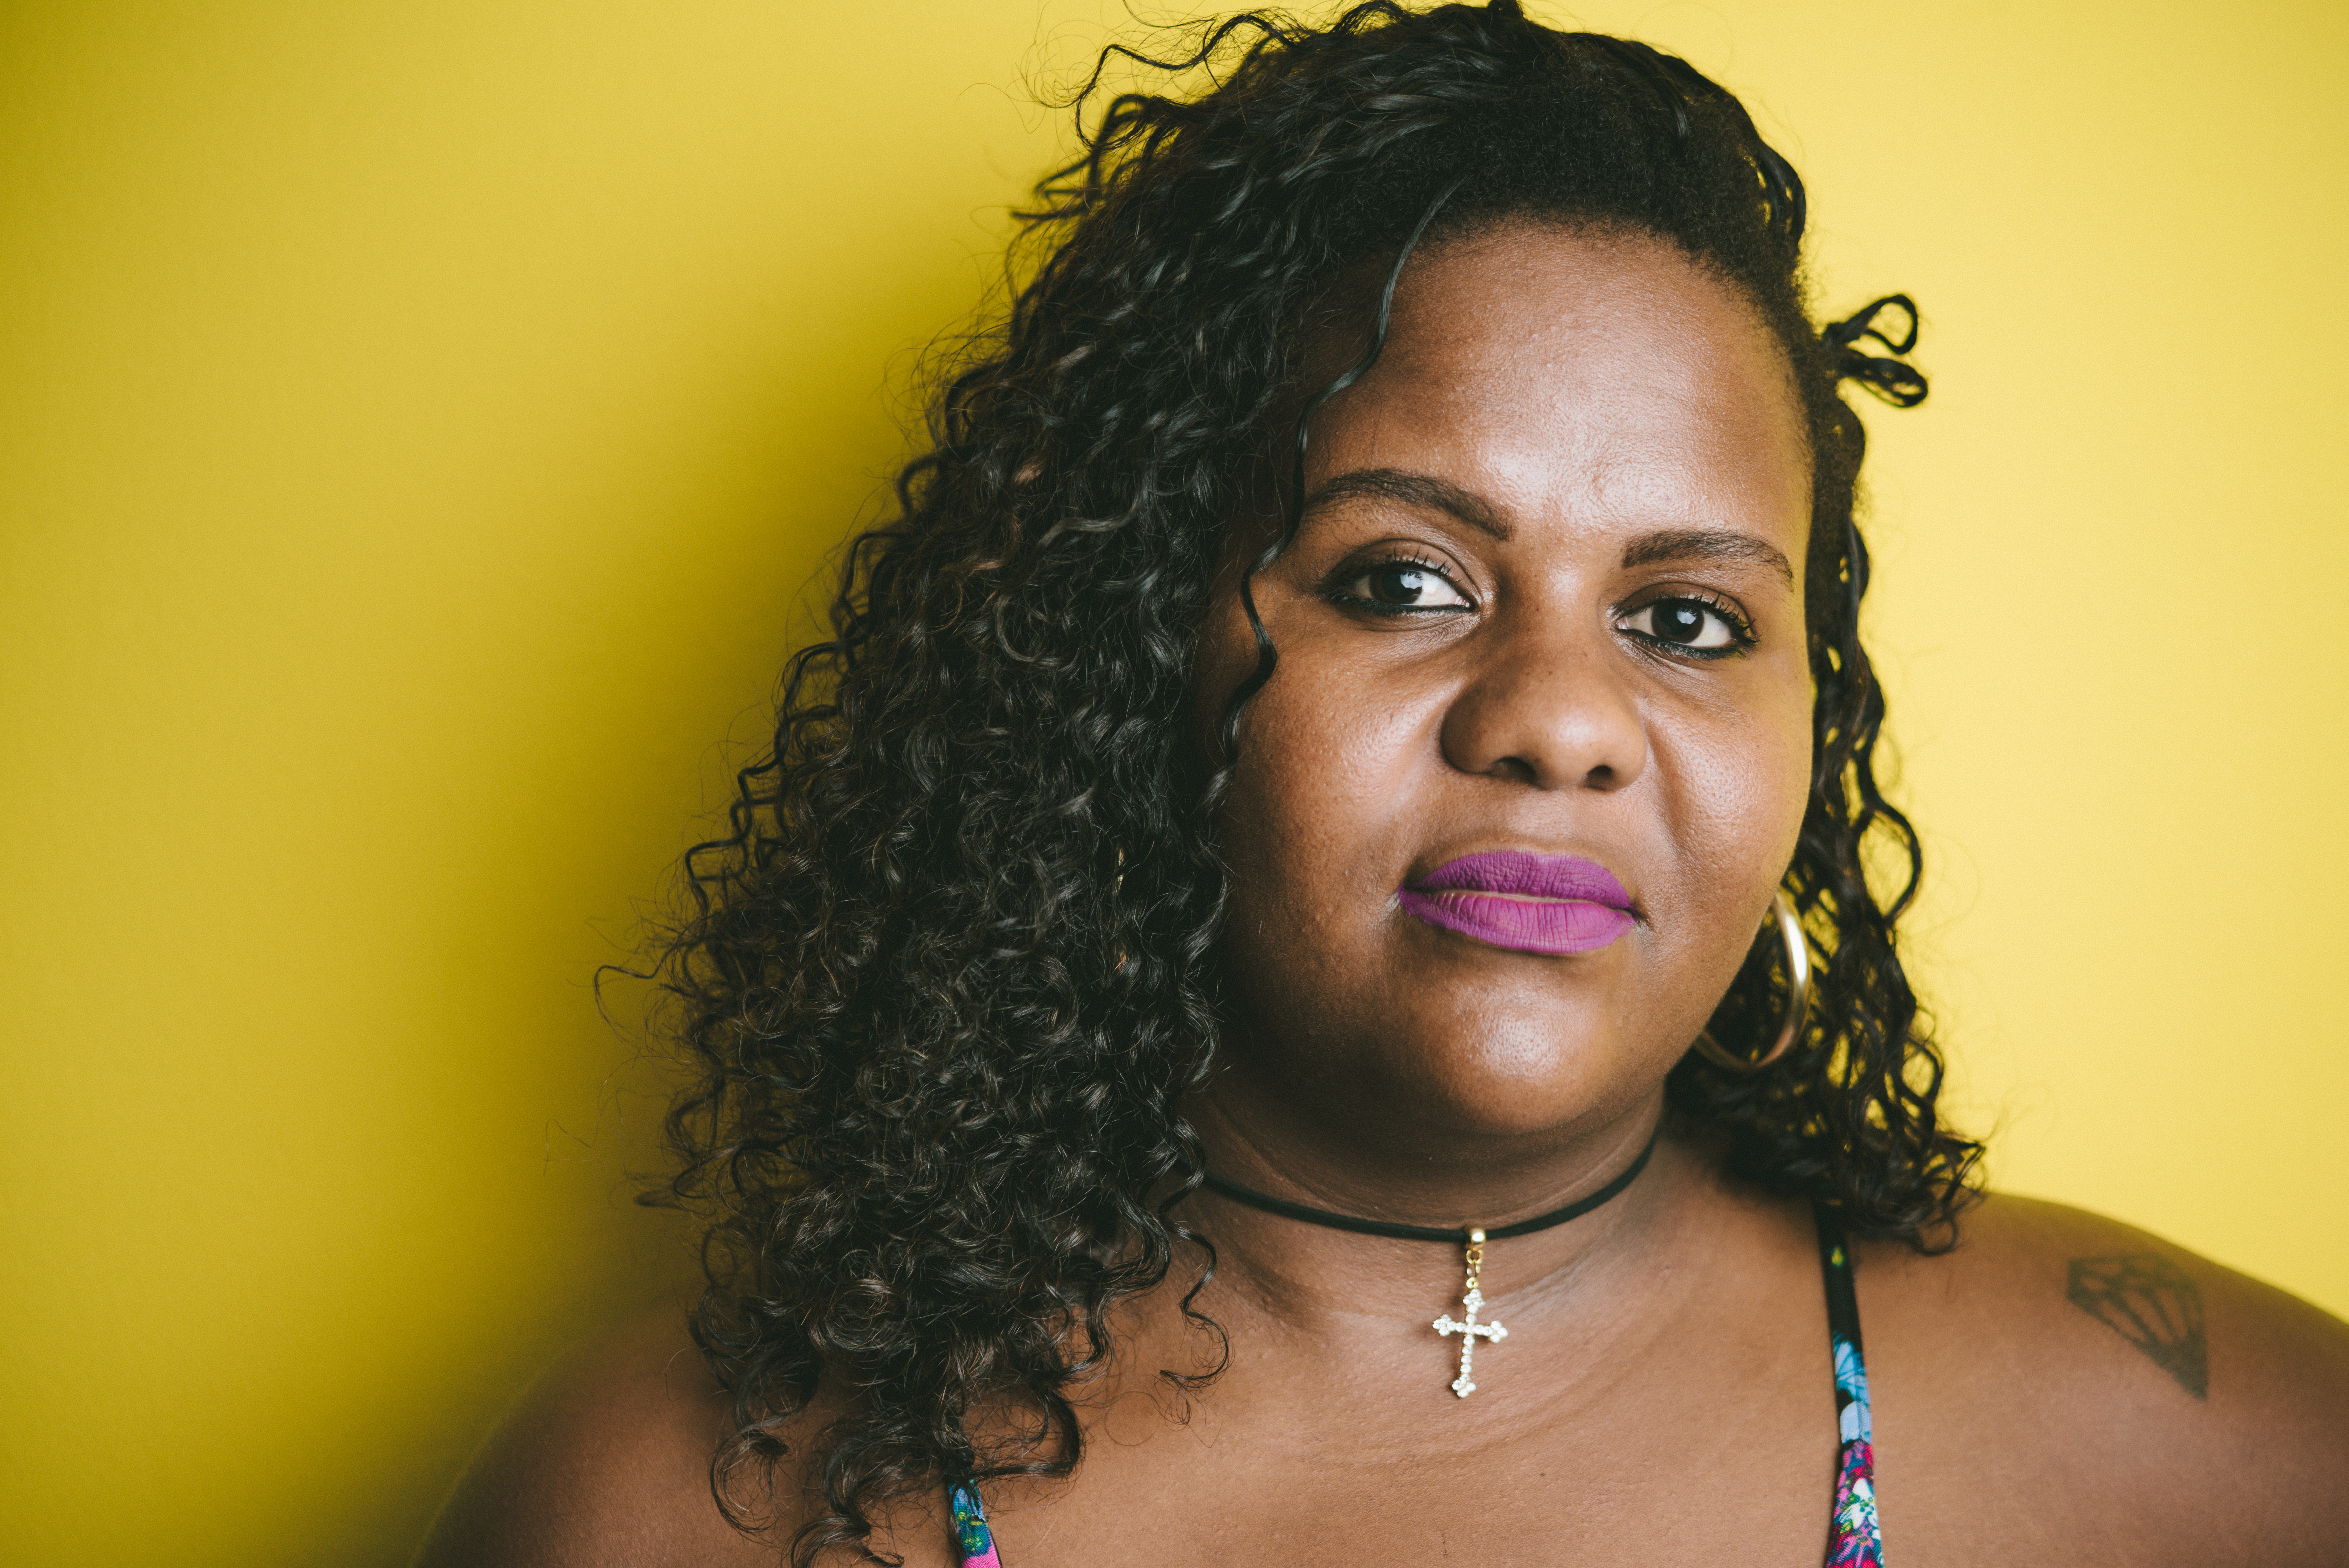 Portrait of a plus size woman on a yellow background